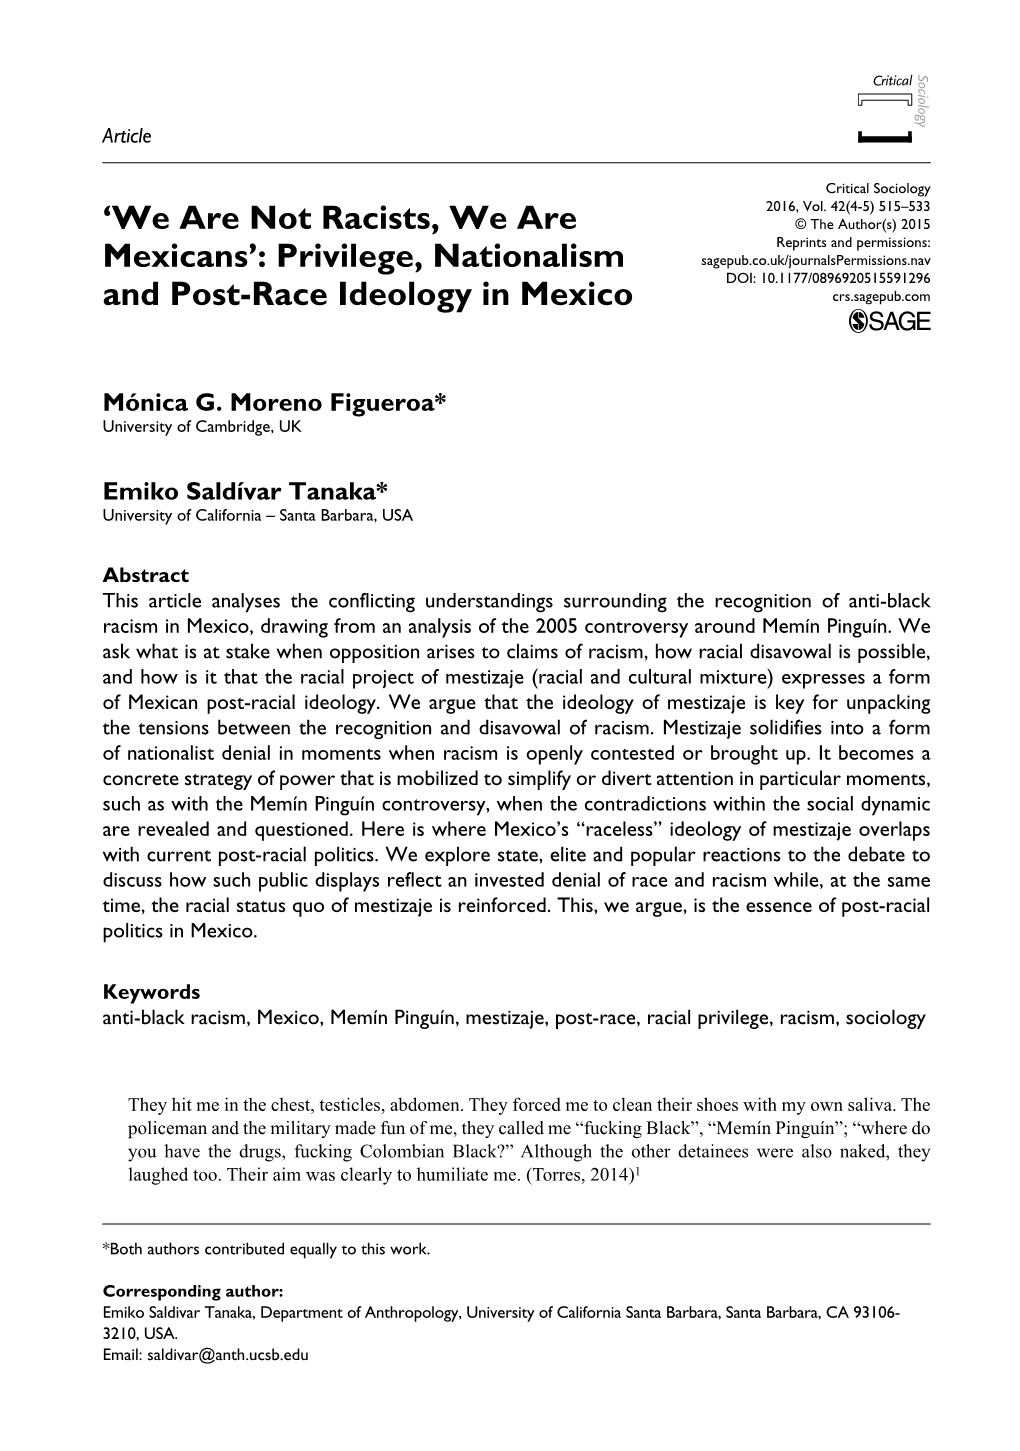 Privilege, Nationalism and Post-Race Ideology in Mexico